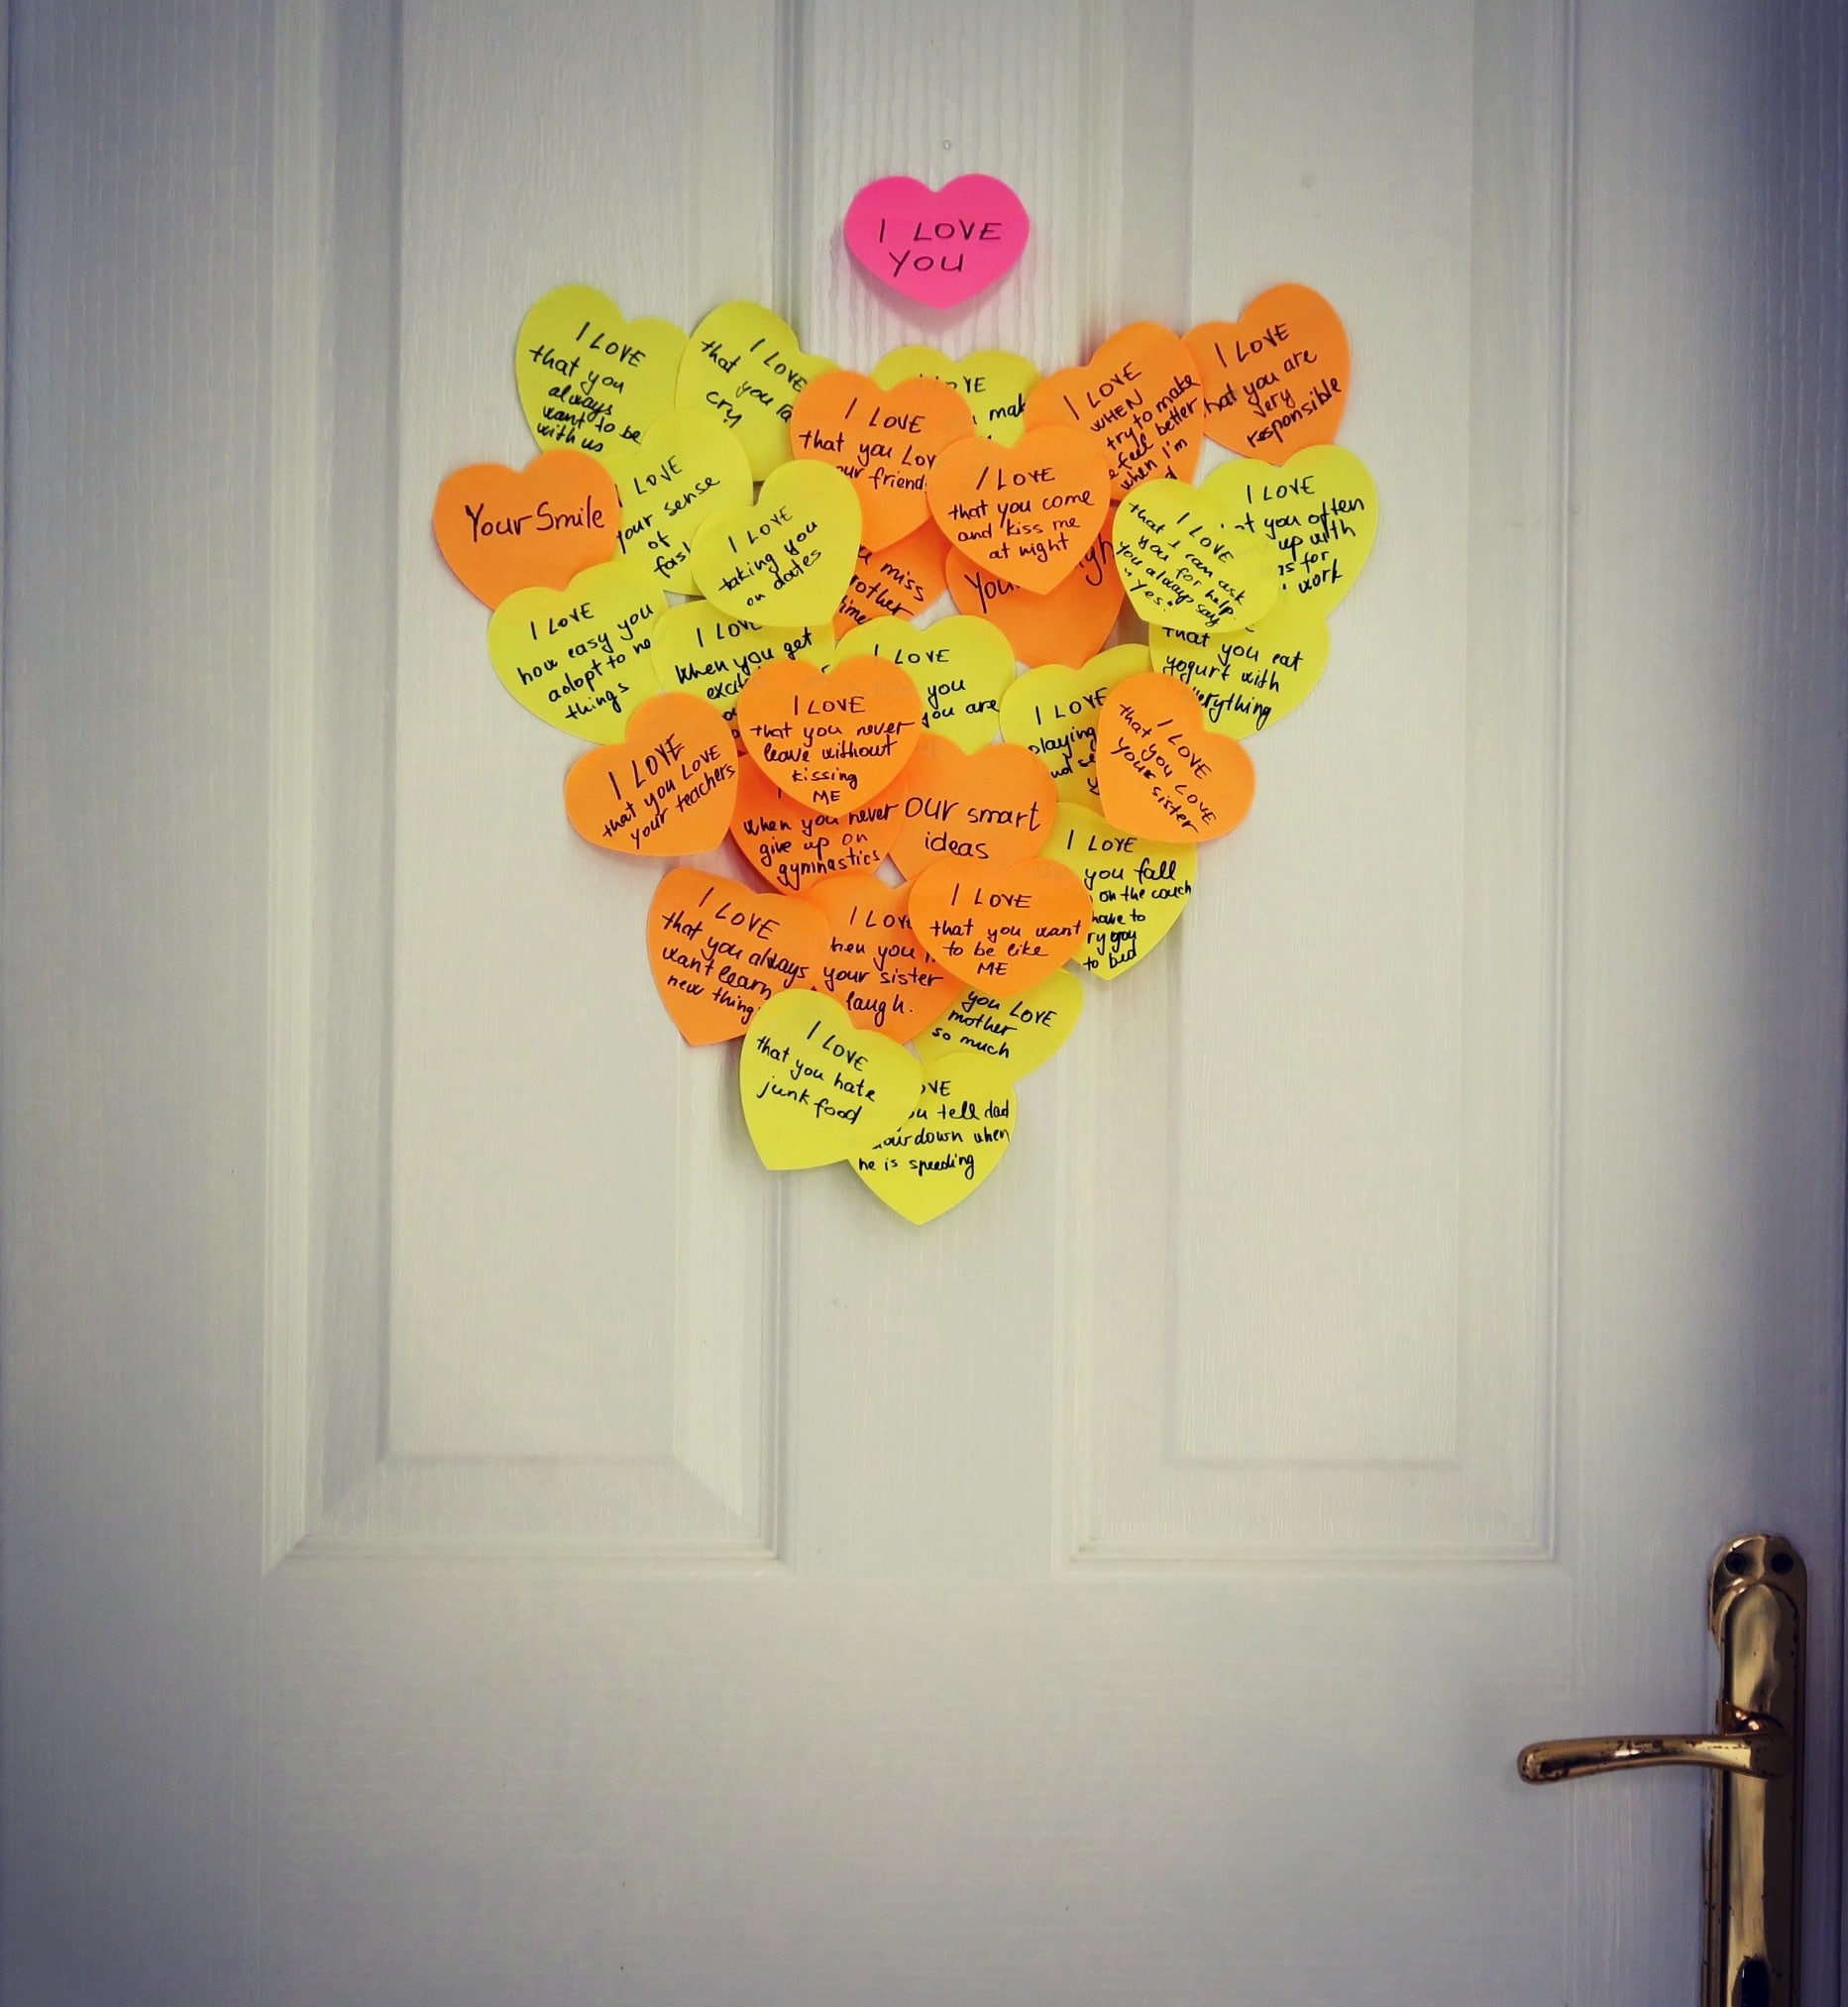 Bunch of sticky notes in a shape of heart on a door.